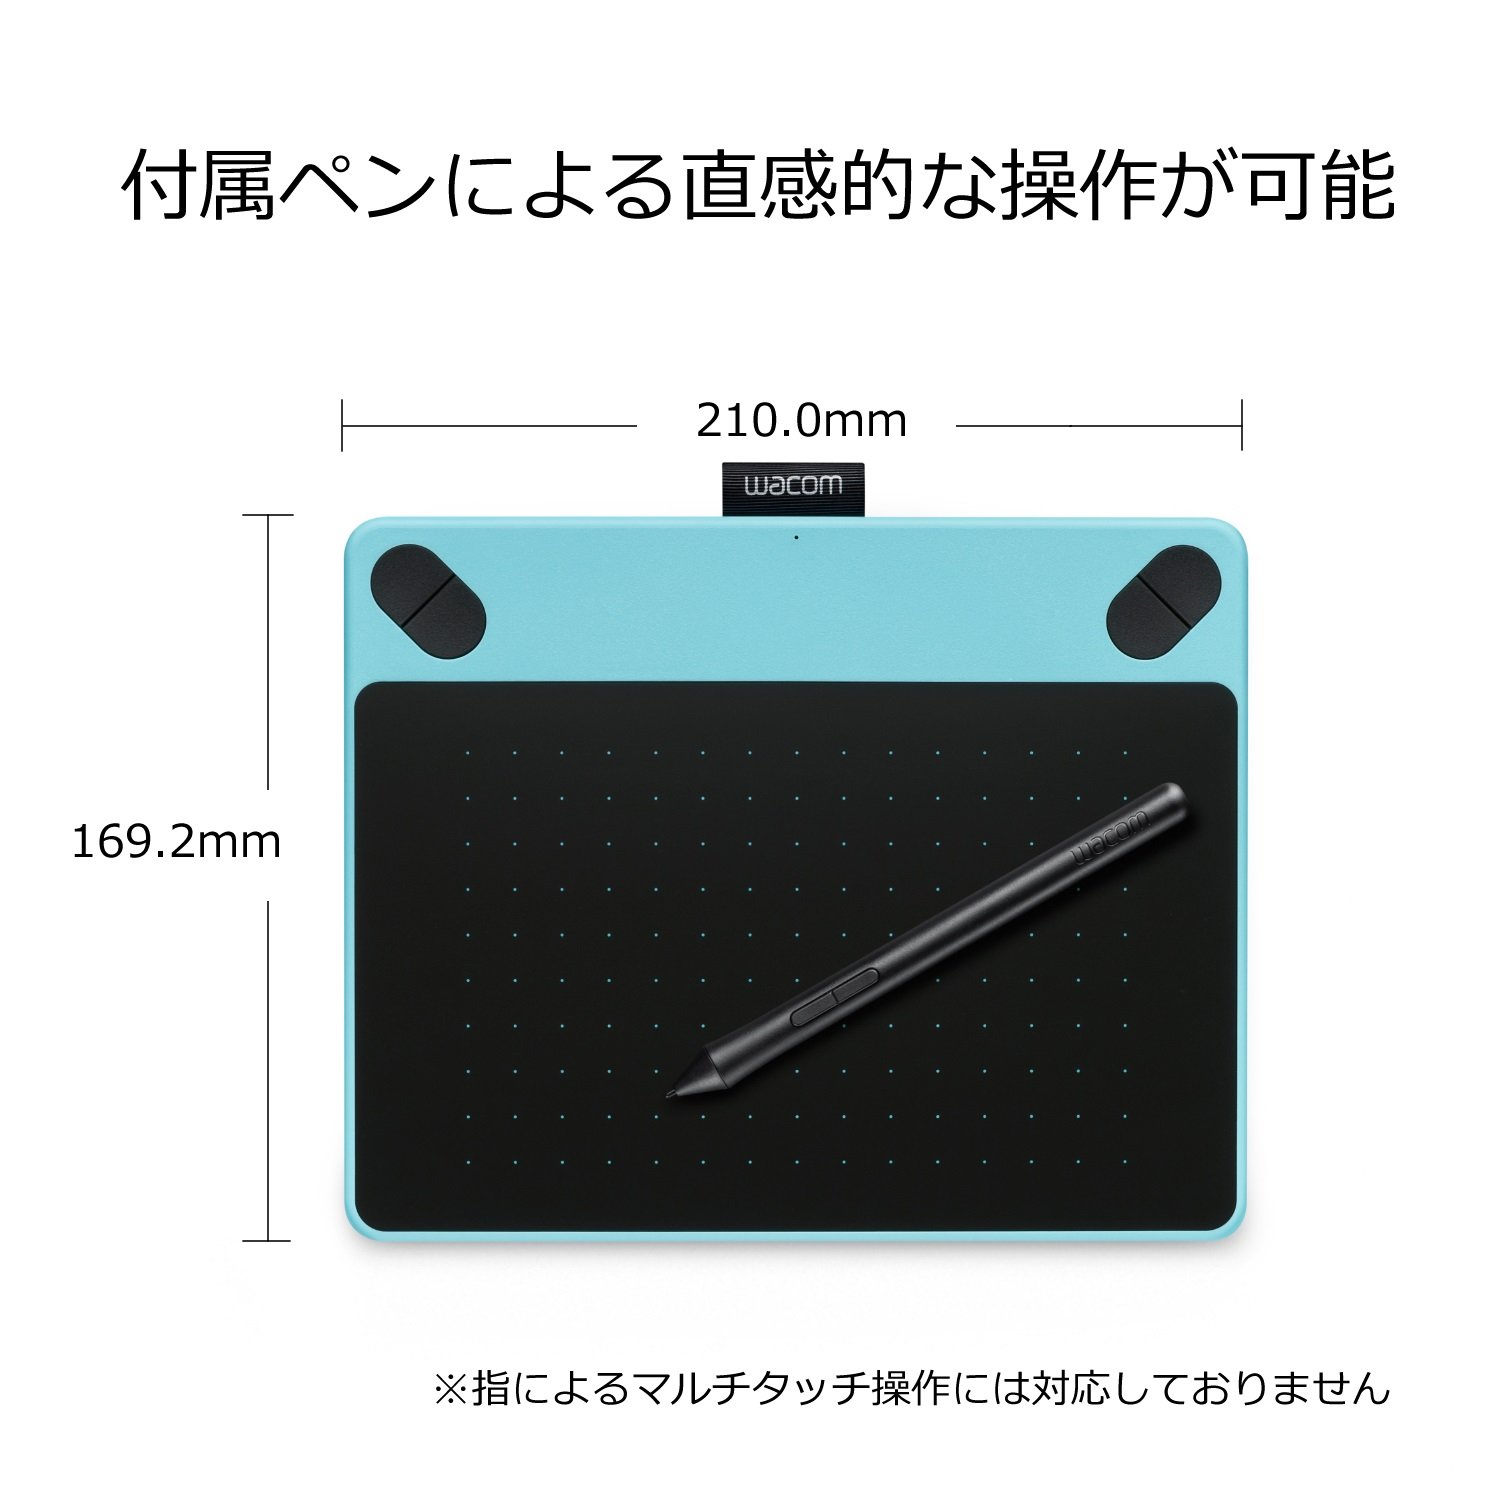 This Wacom drawing tablet feels like putting pen to paper | ZDNET